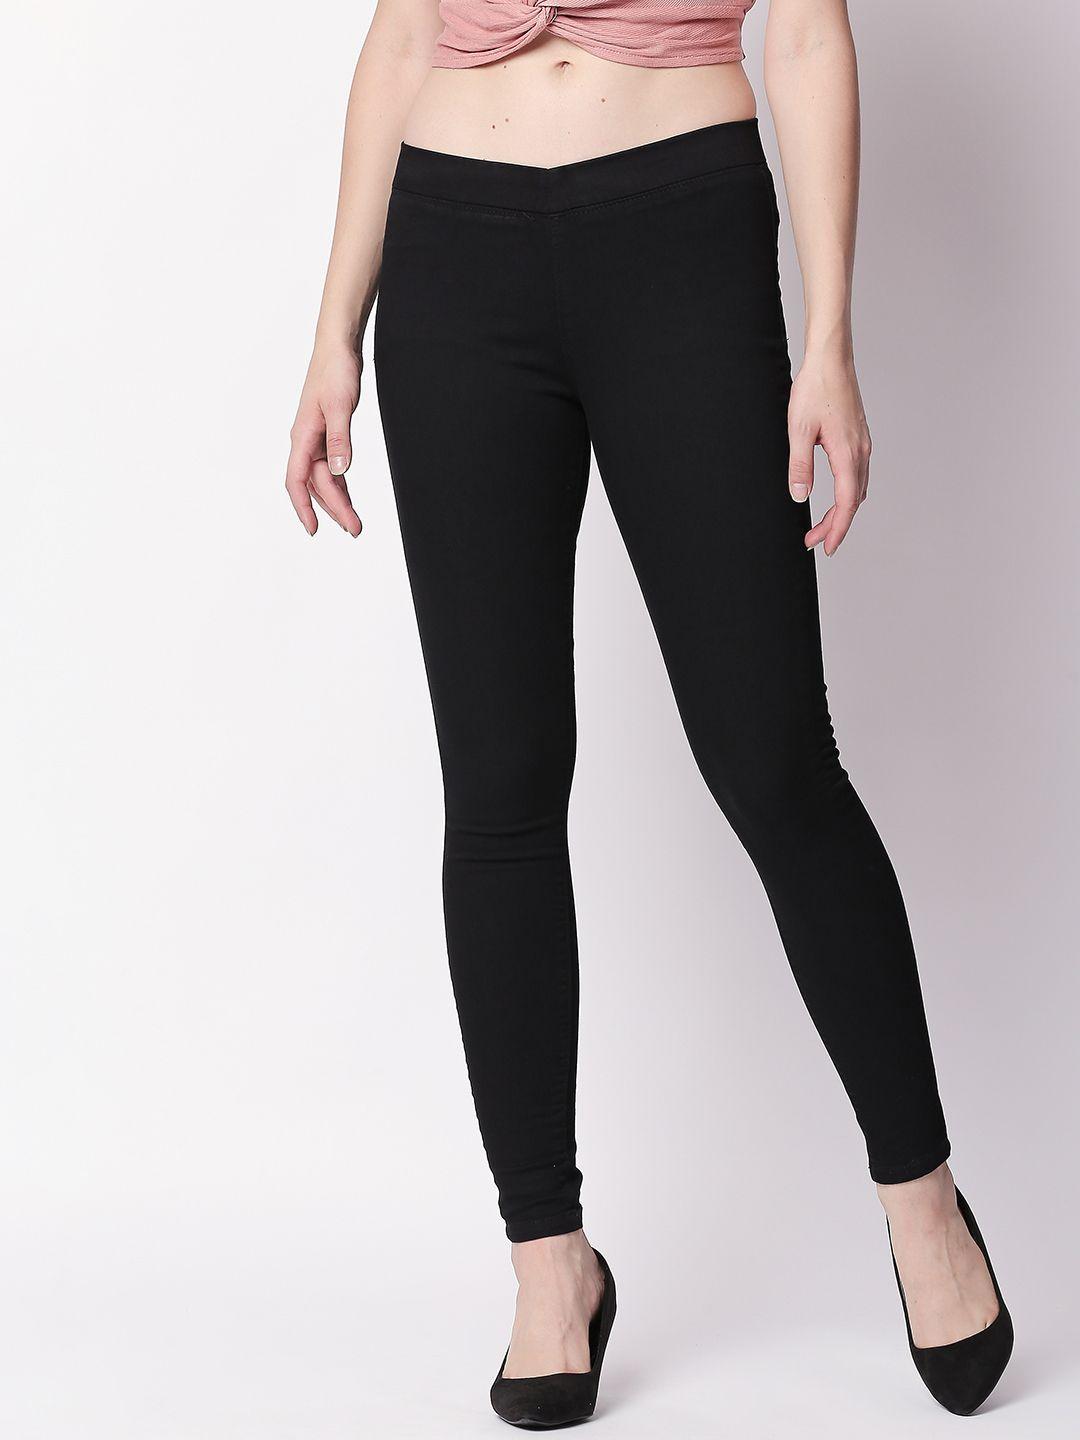 high-star-women-black-solid-slim-fit-stretchable-jeggings